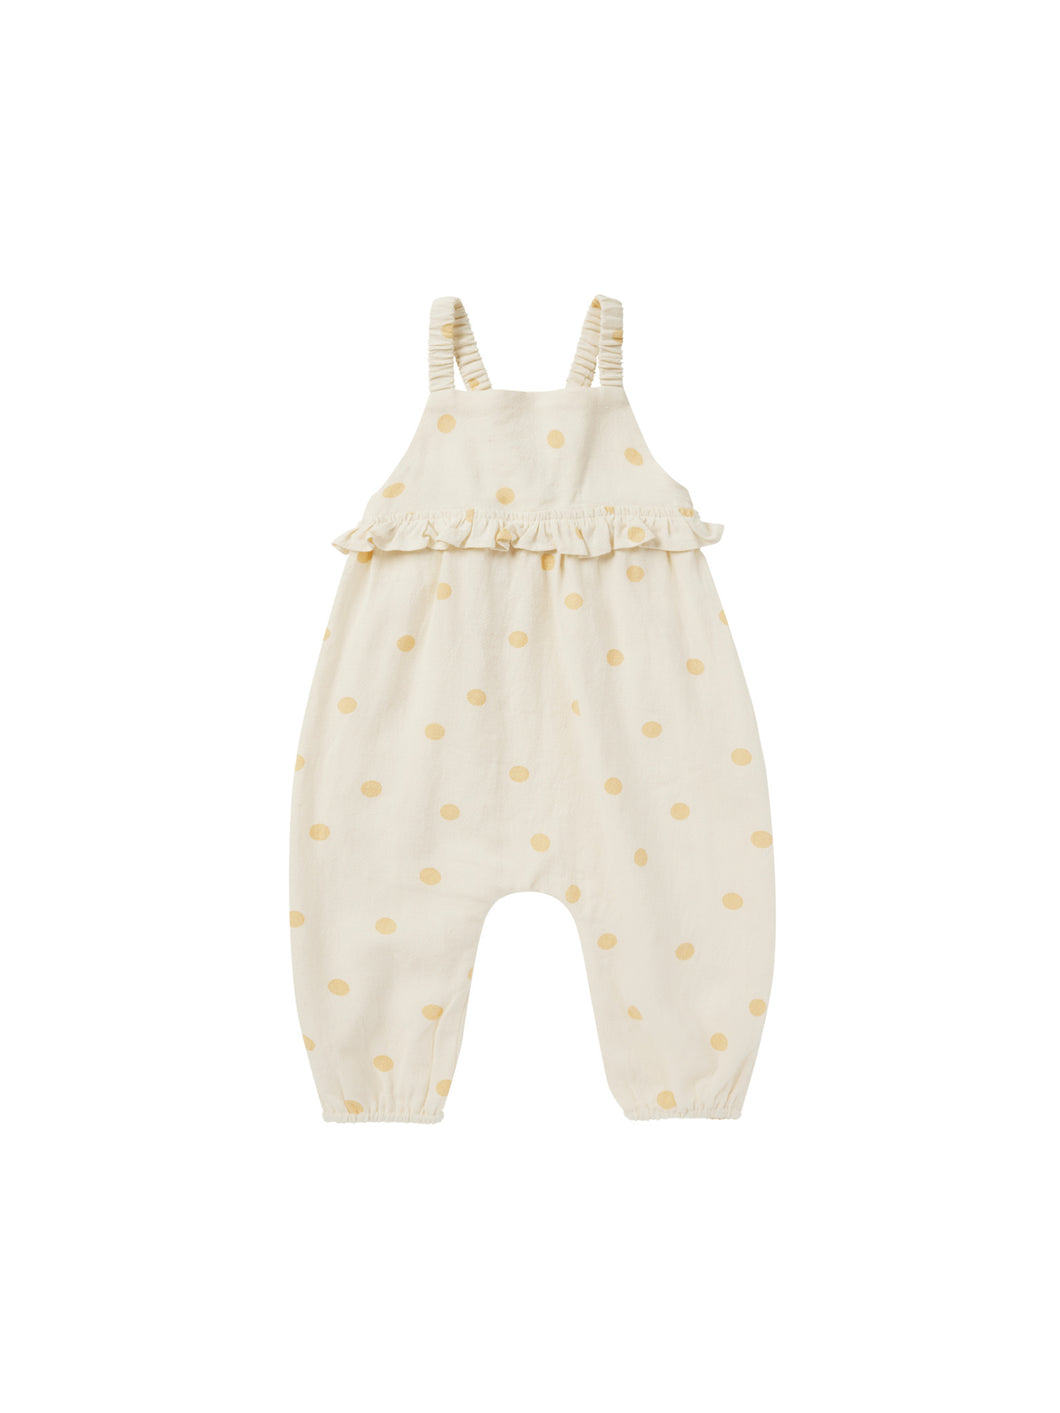 This sleeveless jumpsuit has full length pants with elastic openings, gathered peplum on the empire waistline, and gathered elastic straps.  Featuring a yellow polka dot print. 